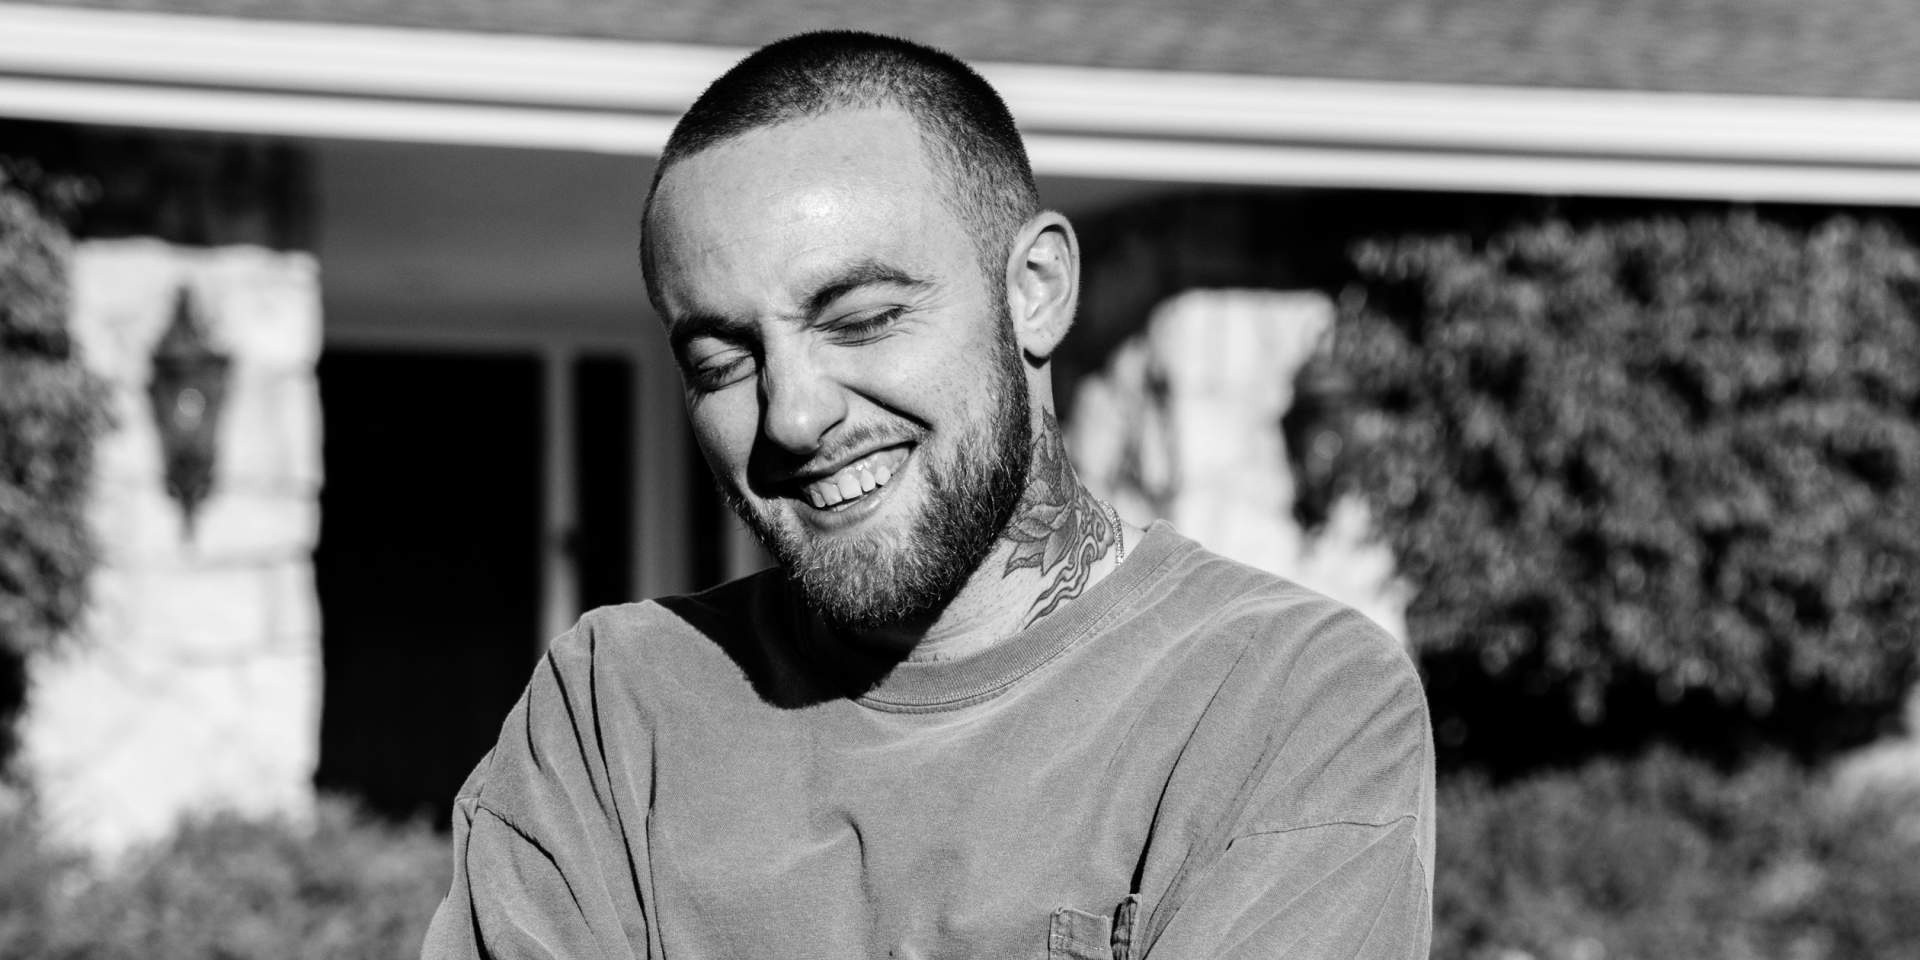 A new posthumous Mac Miller track produced by Metro Boomin has surfaced – listen